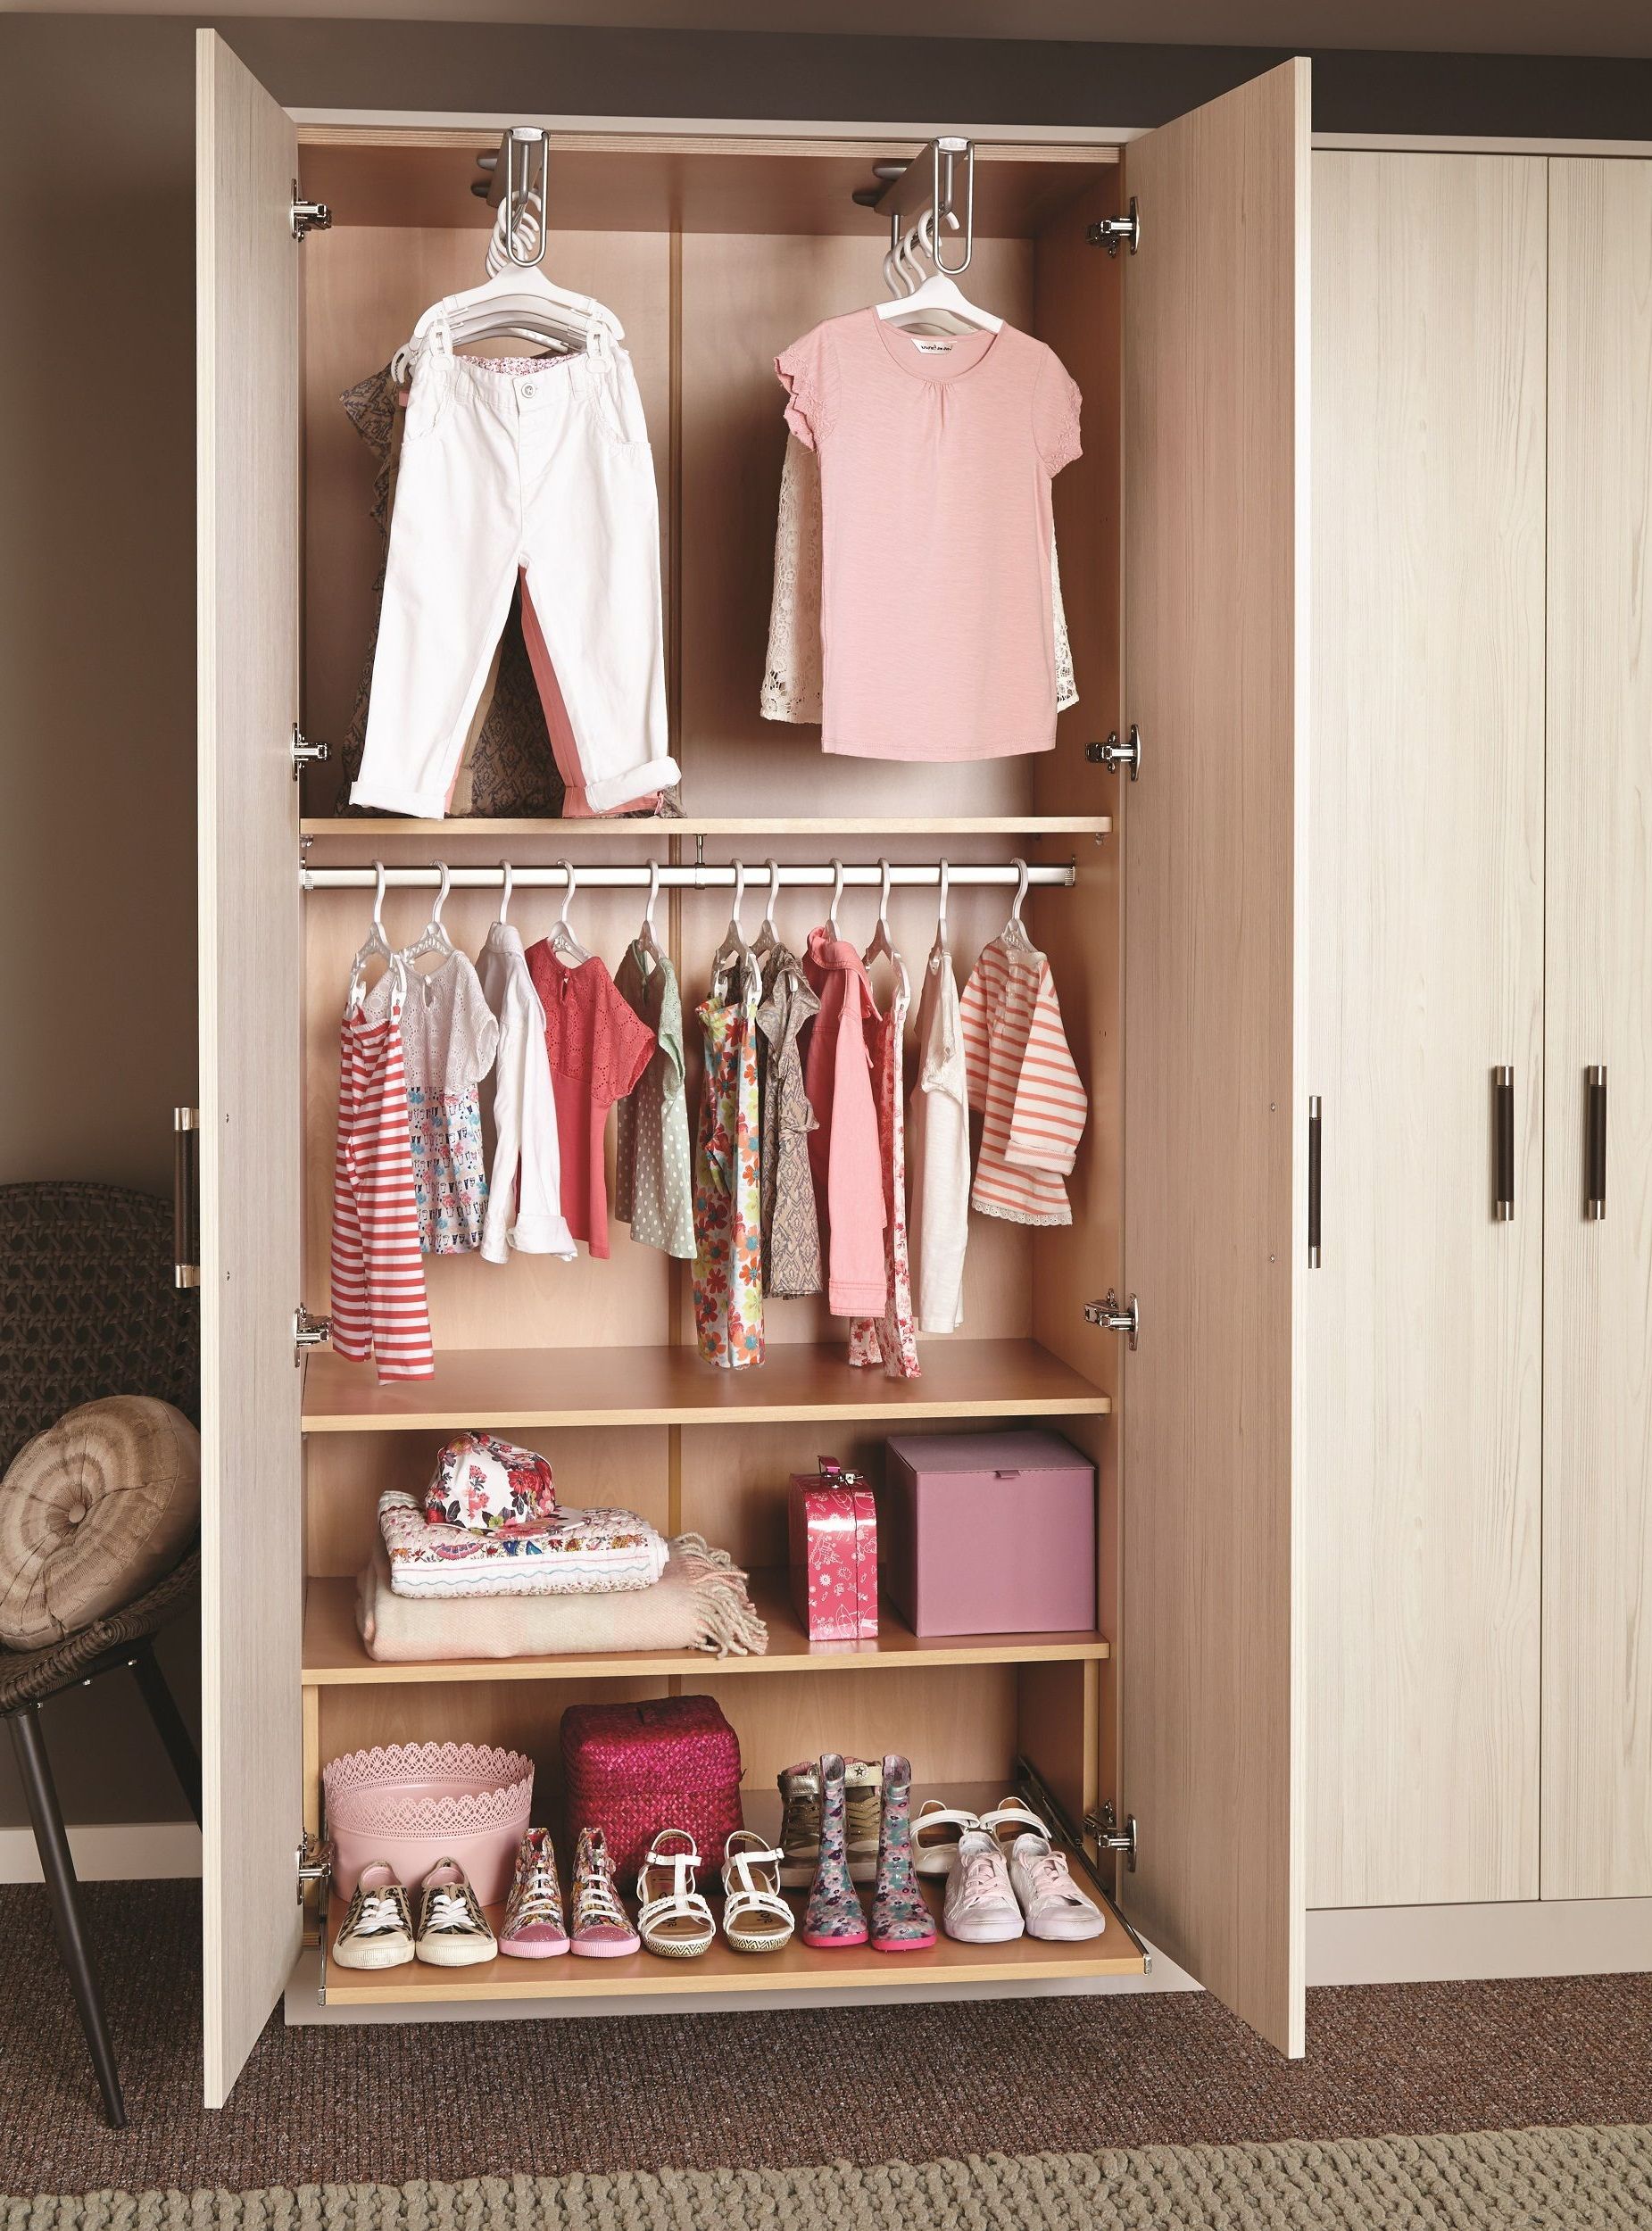 Pinterest Throughout Double Rail Childrens Wardrobes (Gallery 1 of 20)